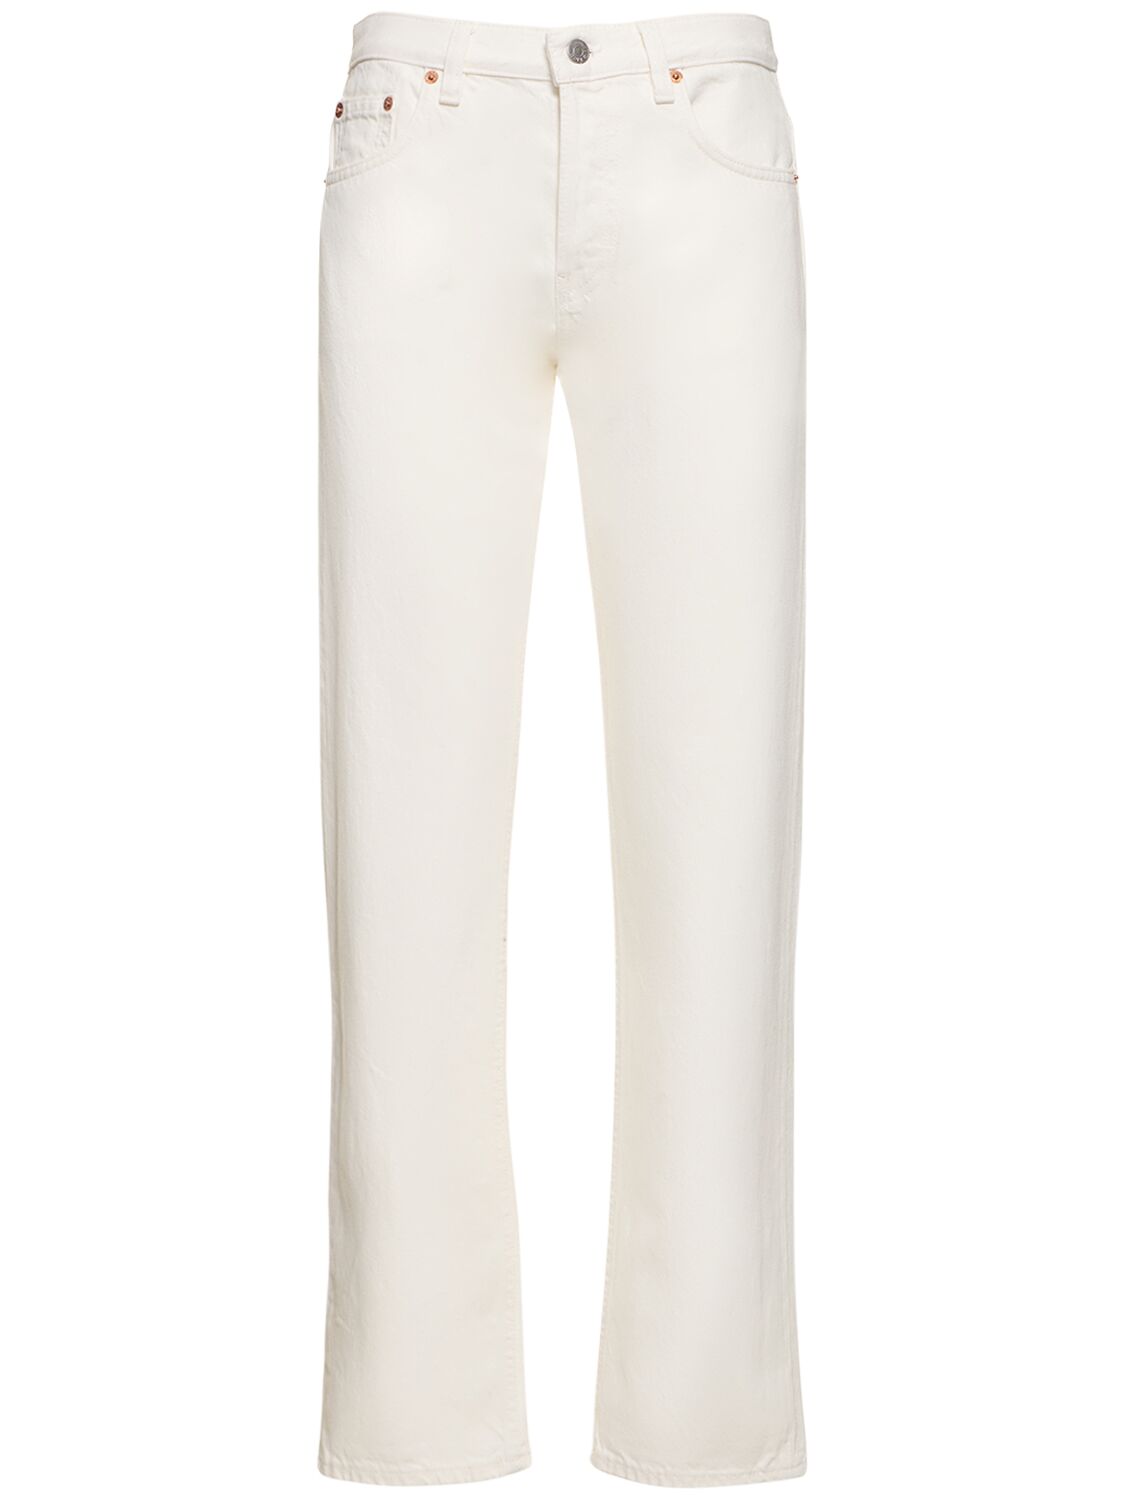 Shop Sporty And Rich Vintage Fit Denim Jeans In White